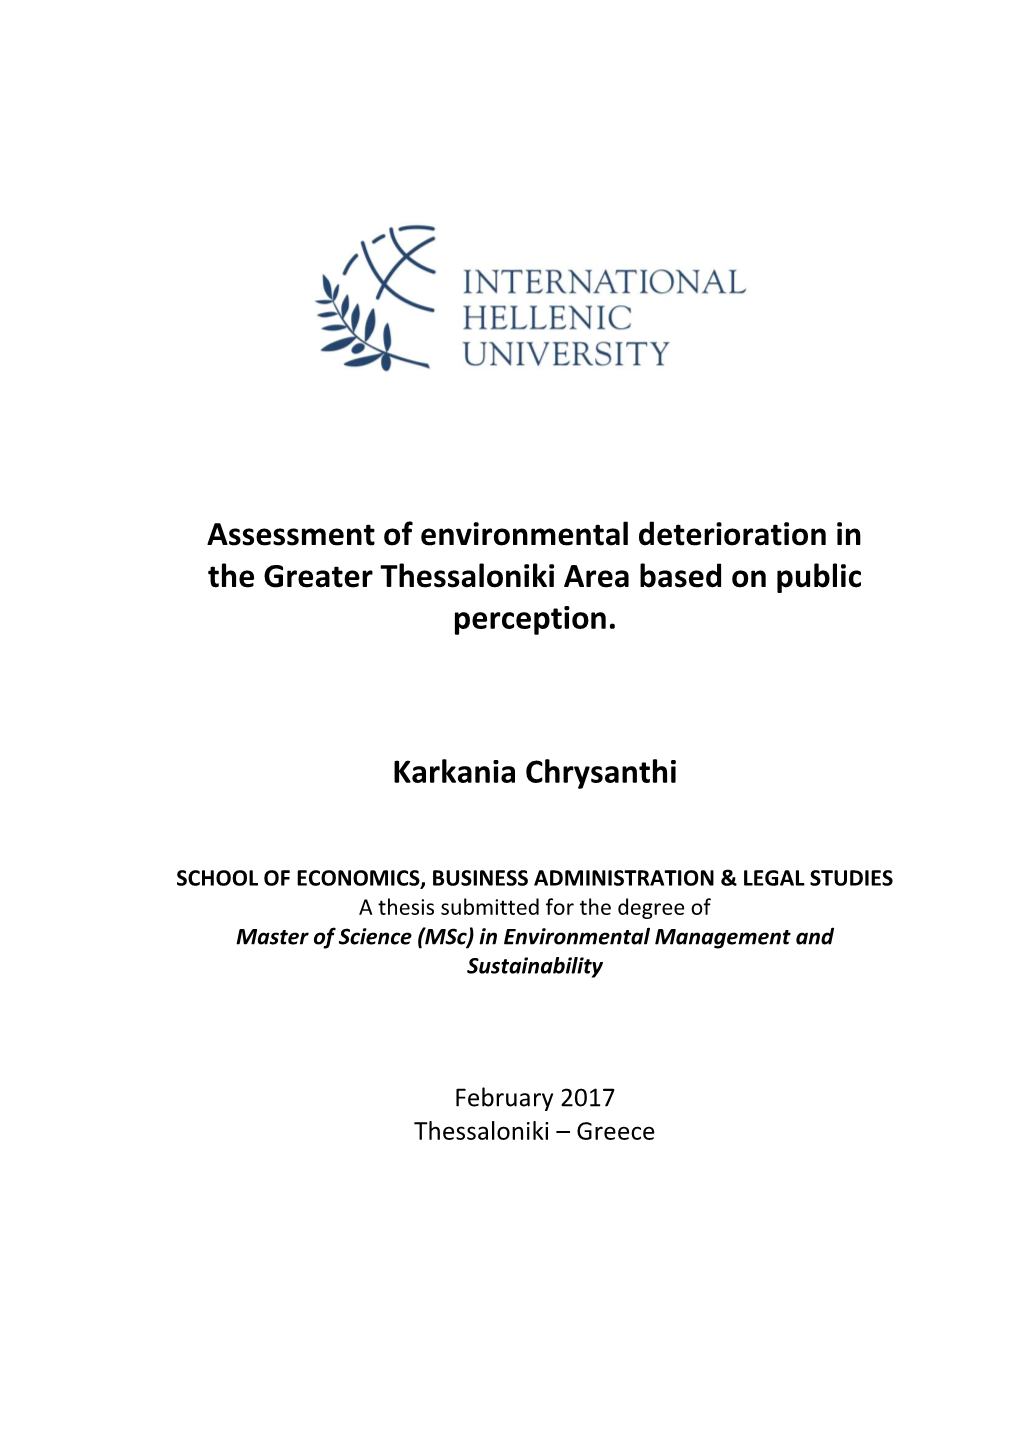 Assessment of Environmental Deterioration in the Greater Thessaloniki Area Based on Public Perception